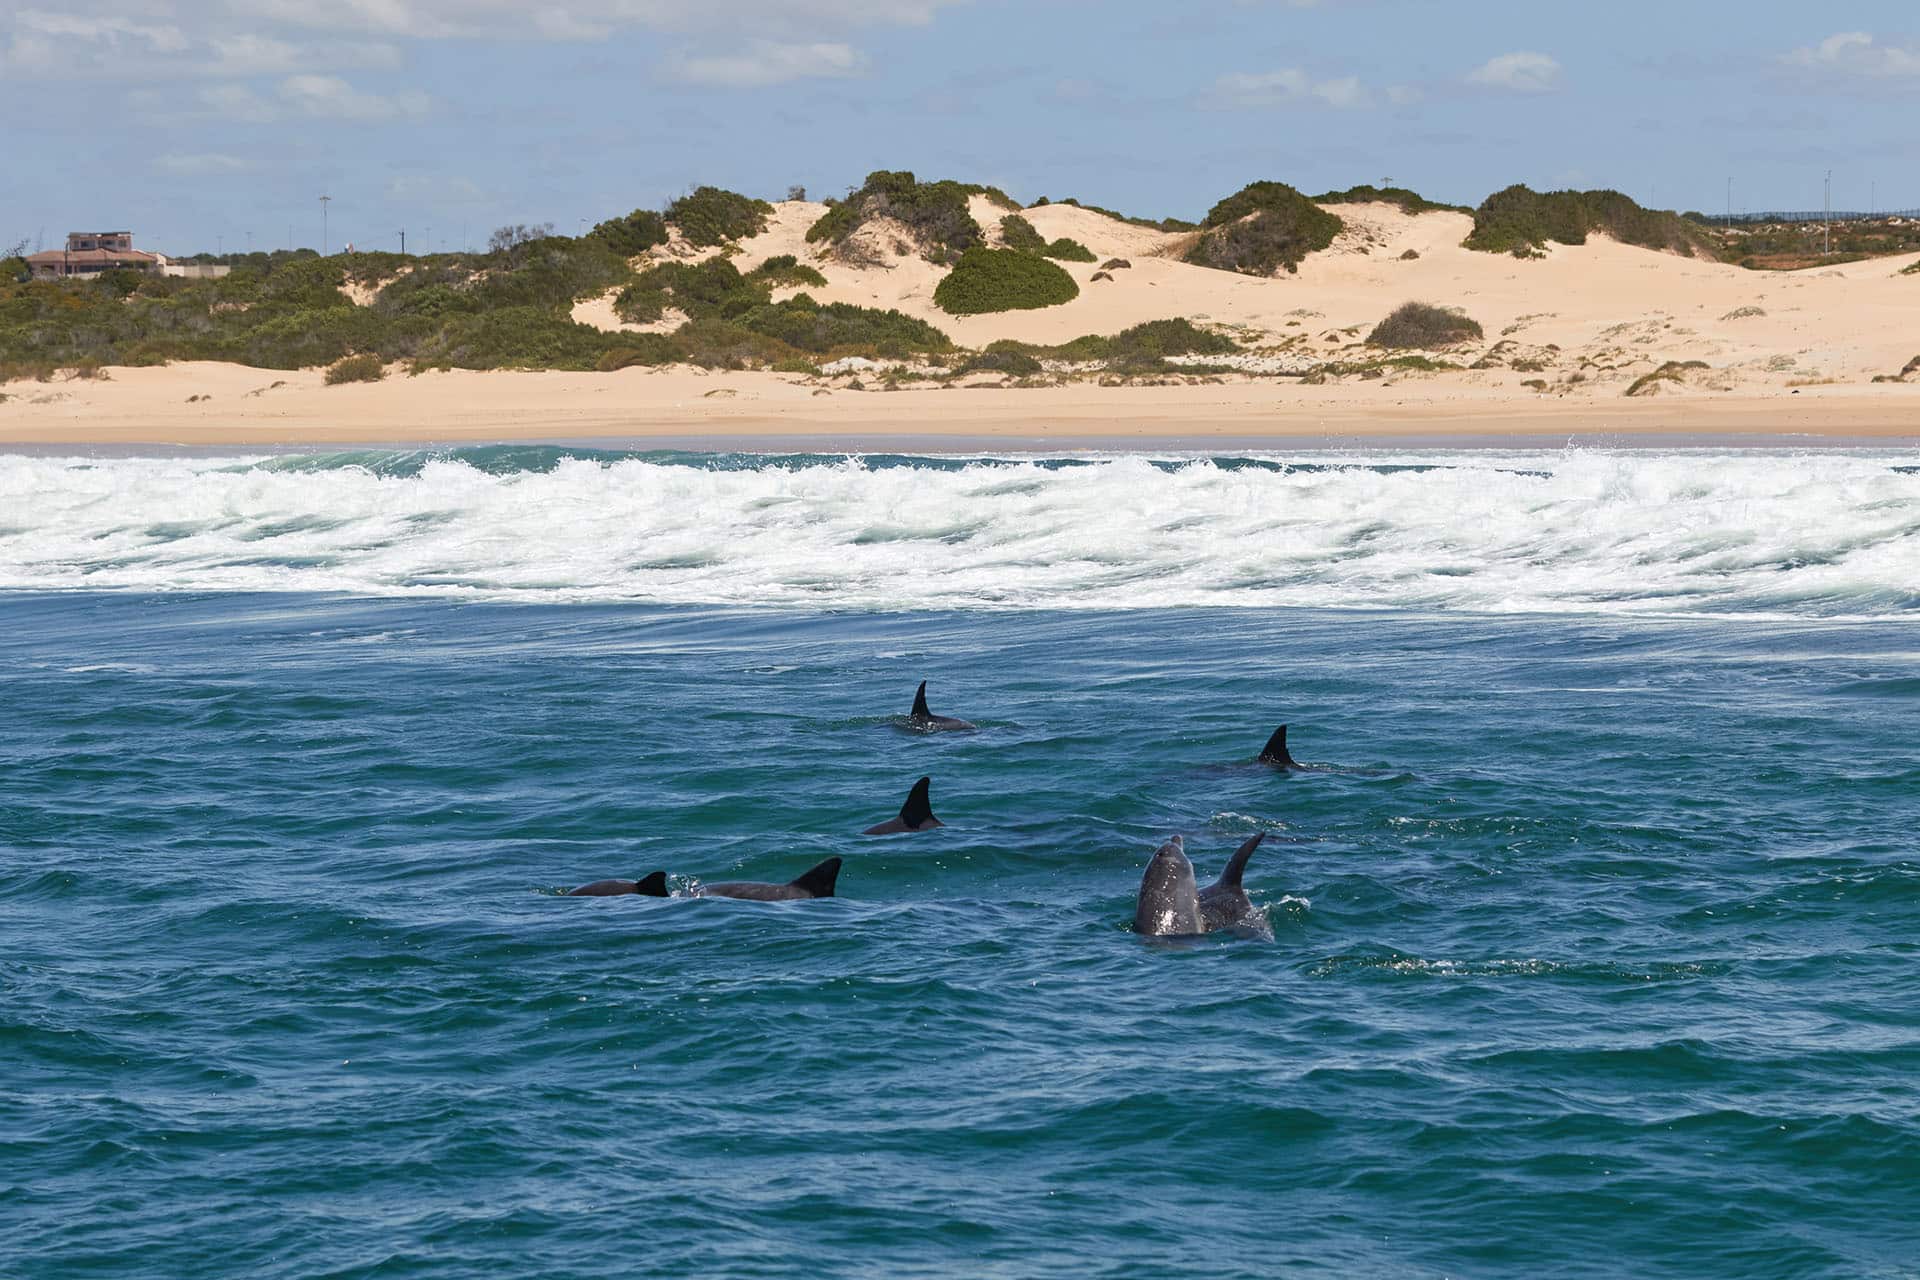 A pod of bottlenose dolphins at Algoa Bay, South Africa - animals that make up the Marine Big Five in South Africa.